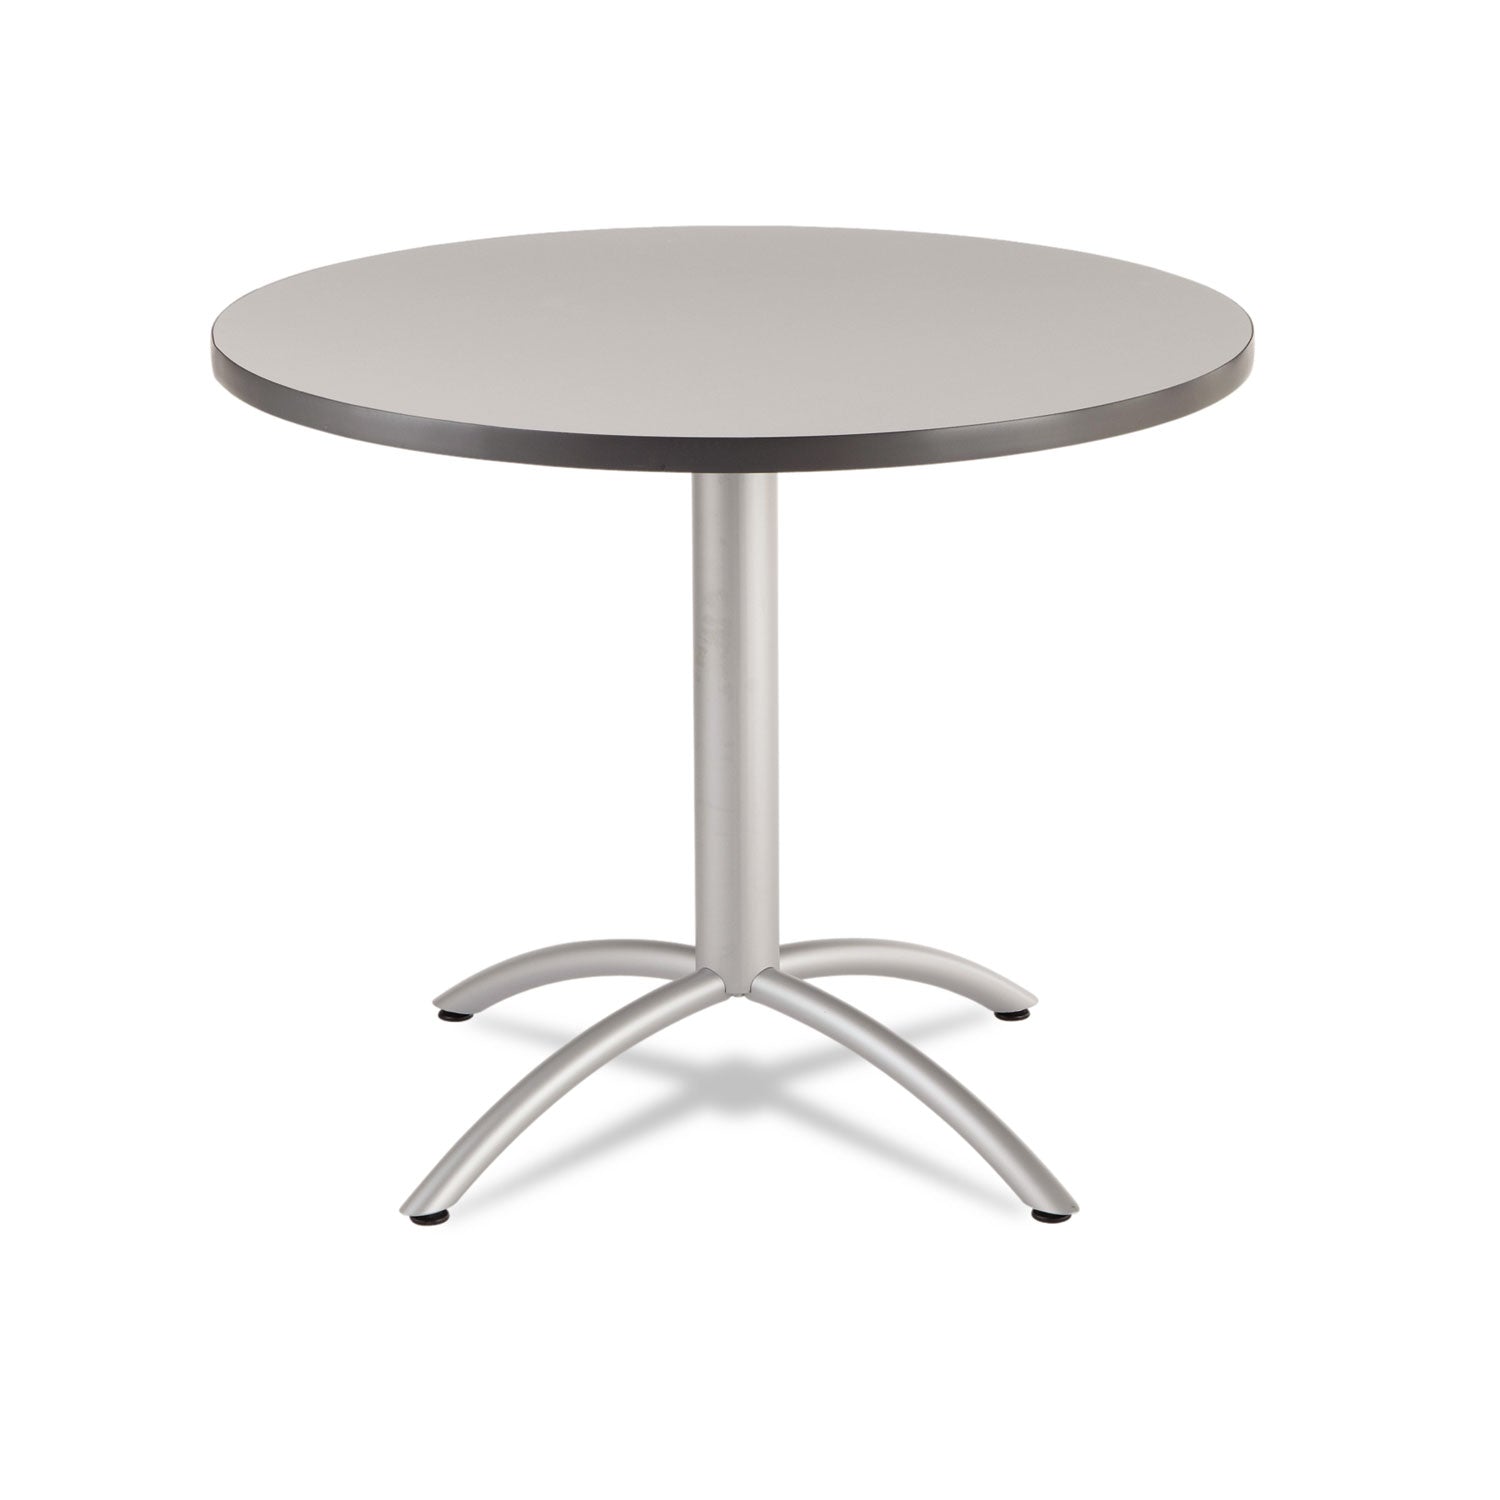 CafeWorks Table, Cafe-Height, Round, 36" x 30", Gray/Silver - 